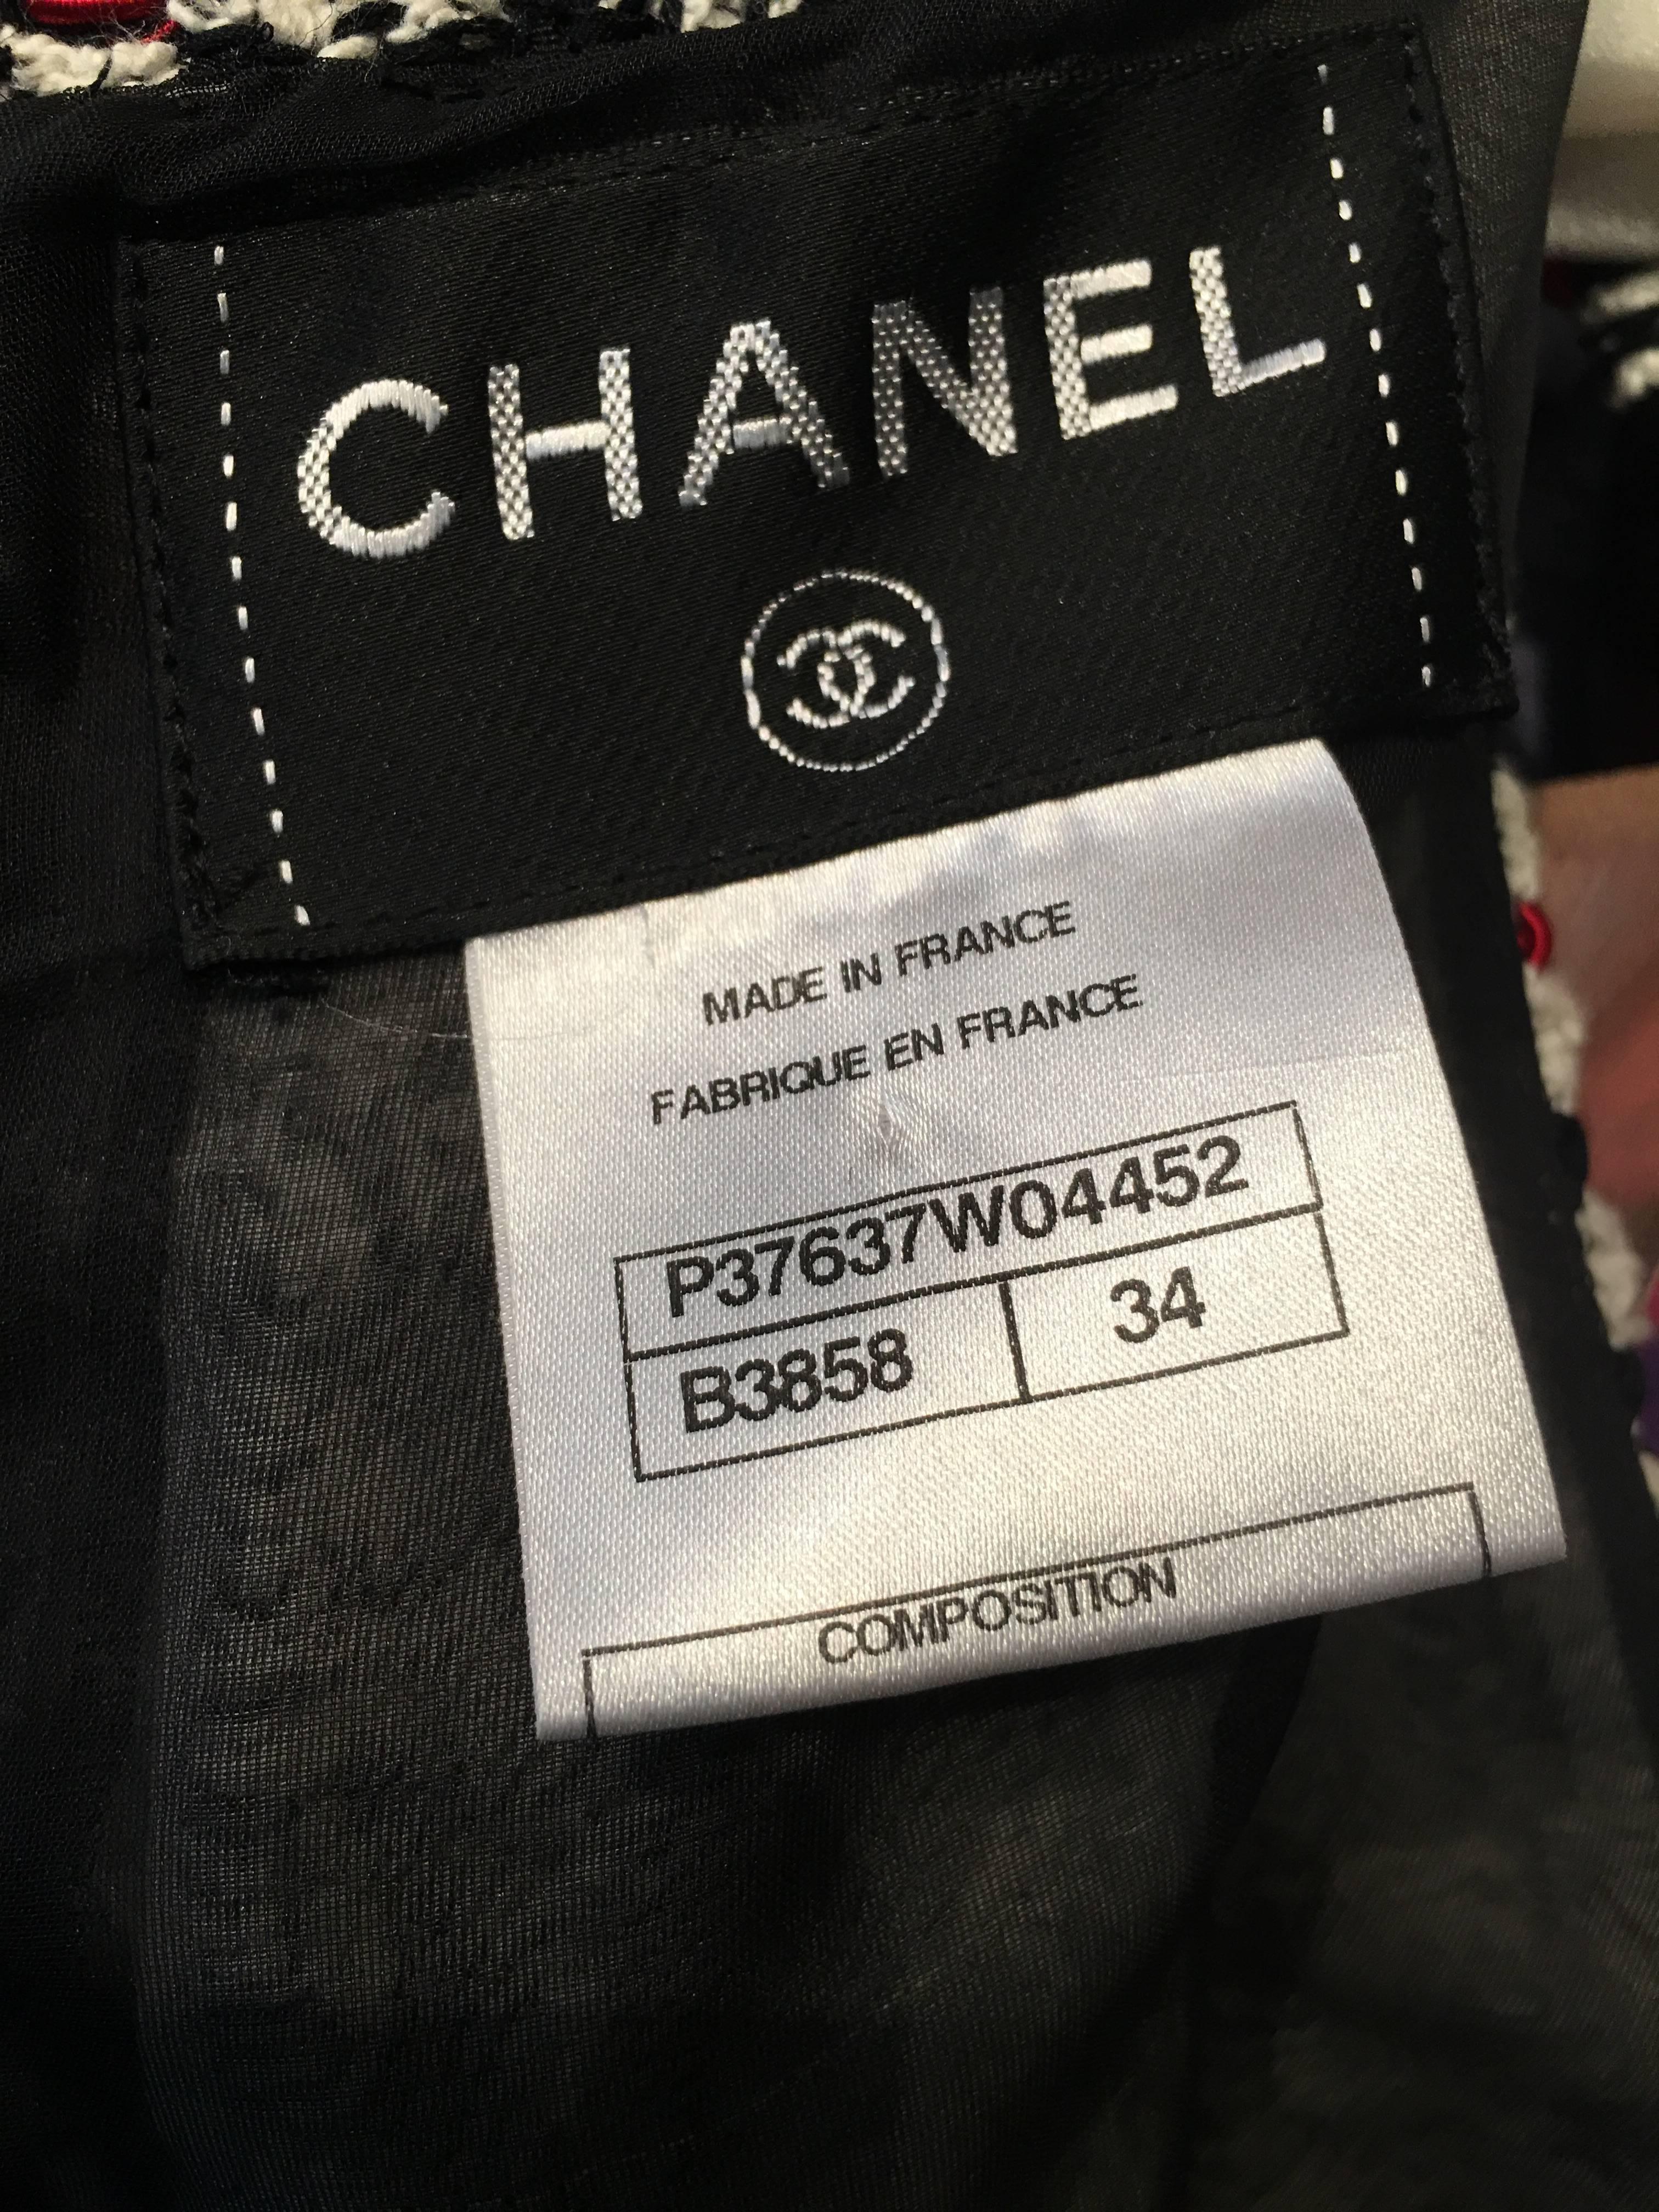 Chanel Black and White Tweed Dress size 34 (2) For Sale 3